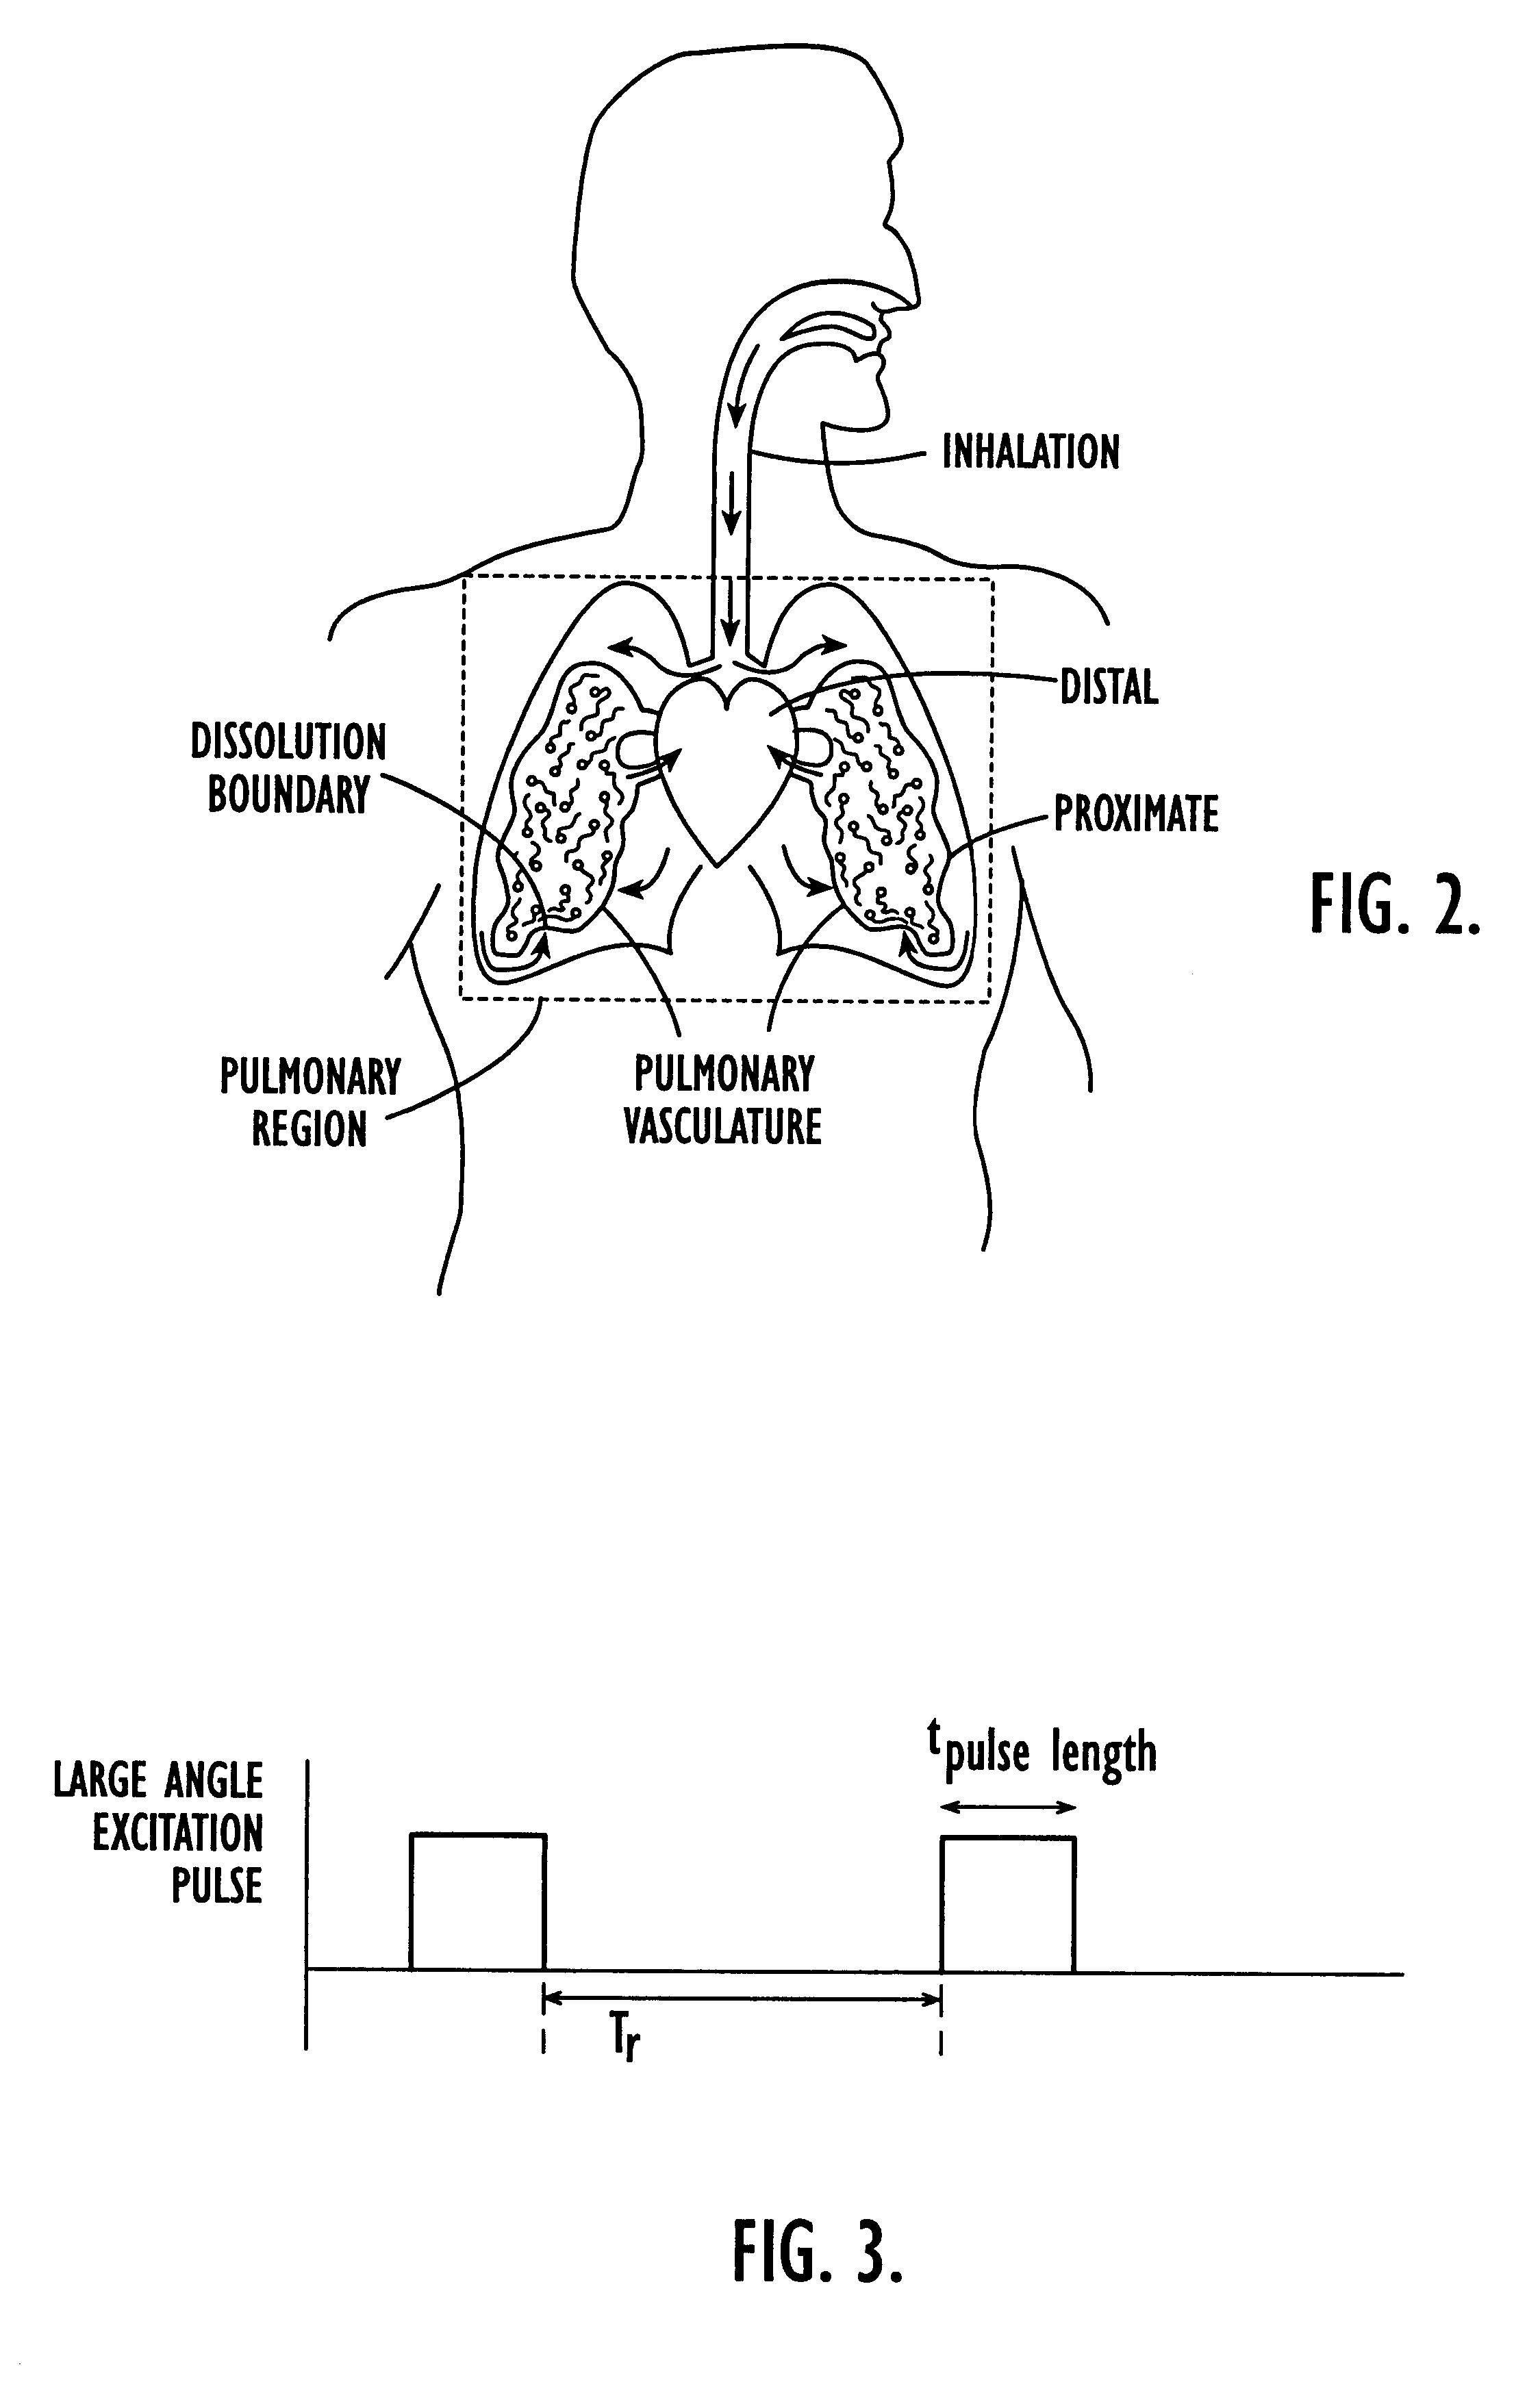 Methods for imaging pulmonary and cardiac vasculature and evaluating blood flow using dissolved polarized 129Xe